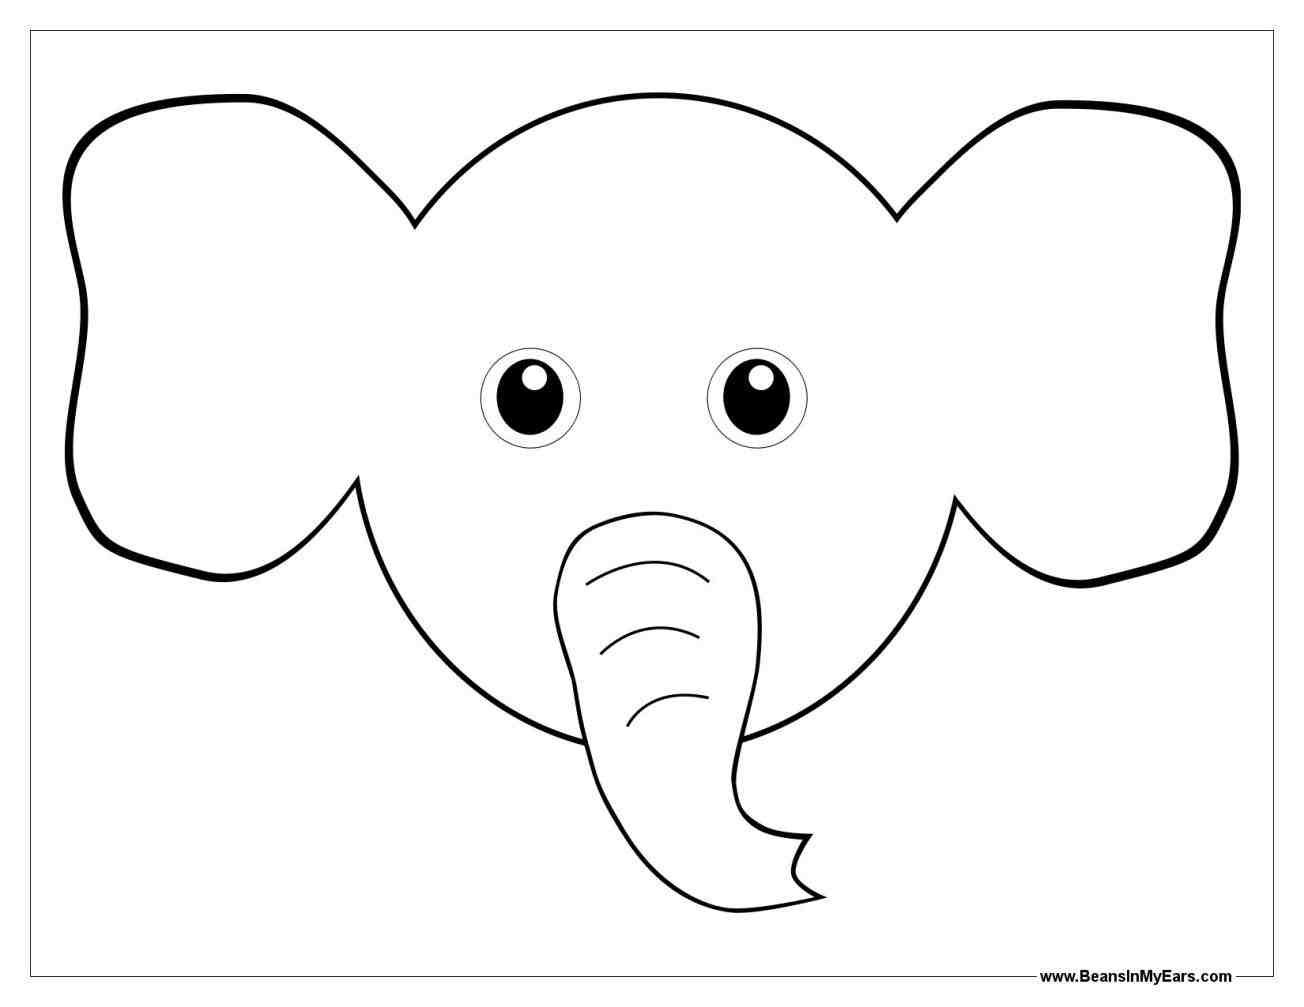 Elephant Drawings | Free download on ClipArtMag